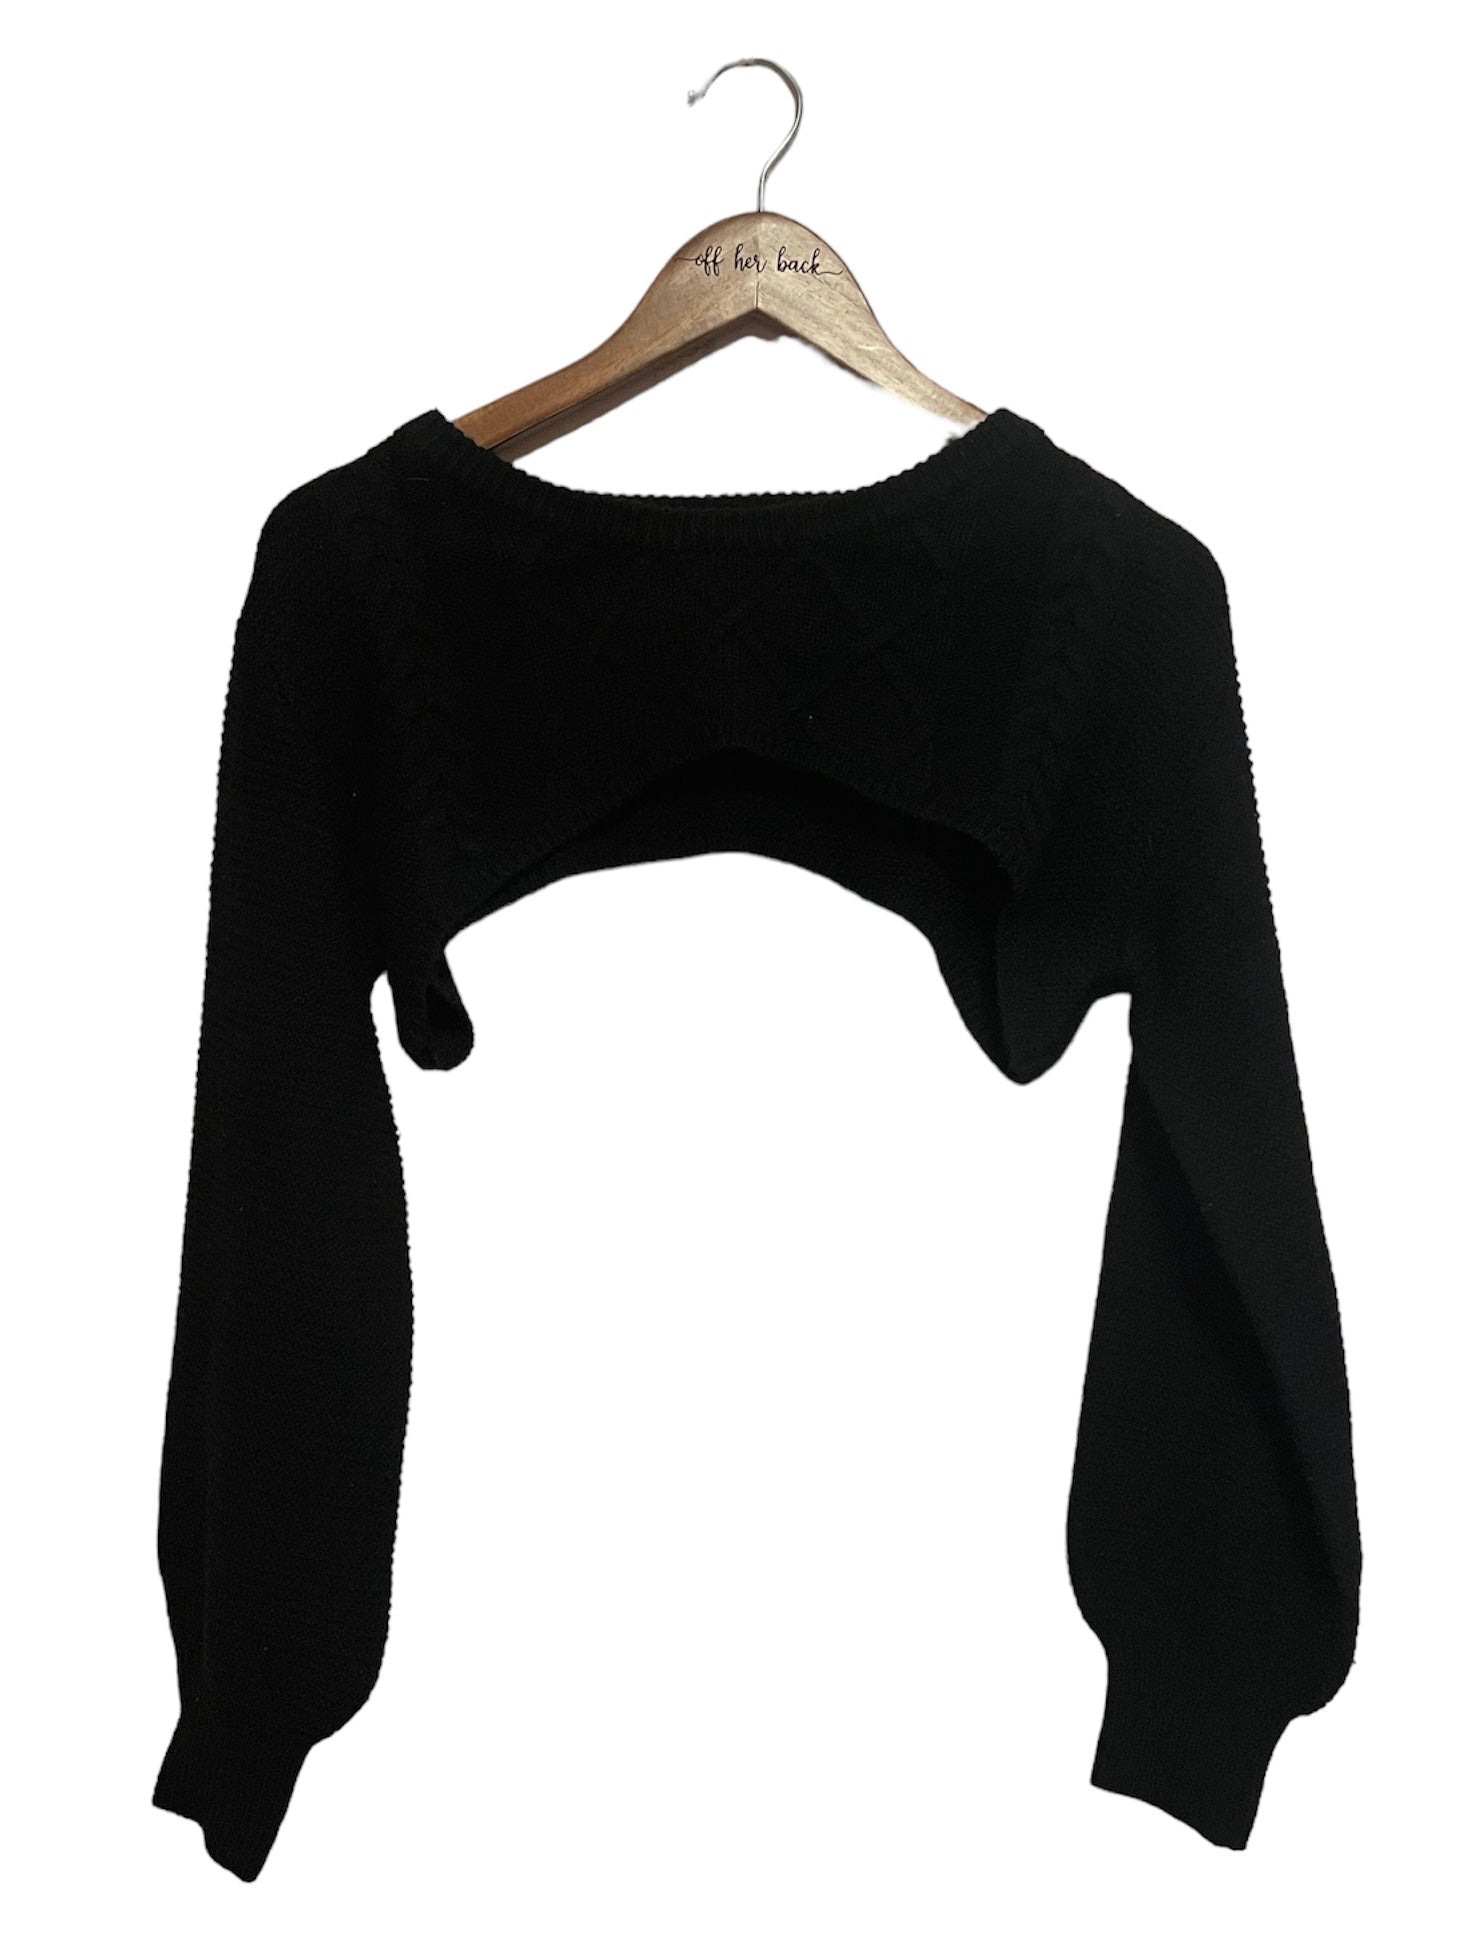 Cropped Pullover Sweater Size: Medium